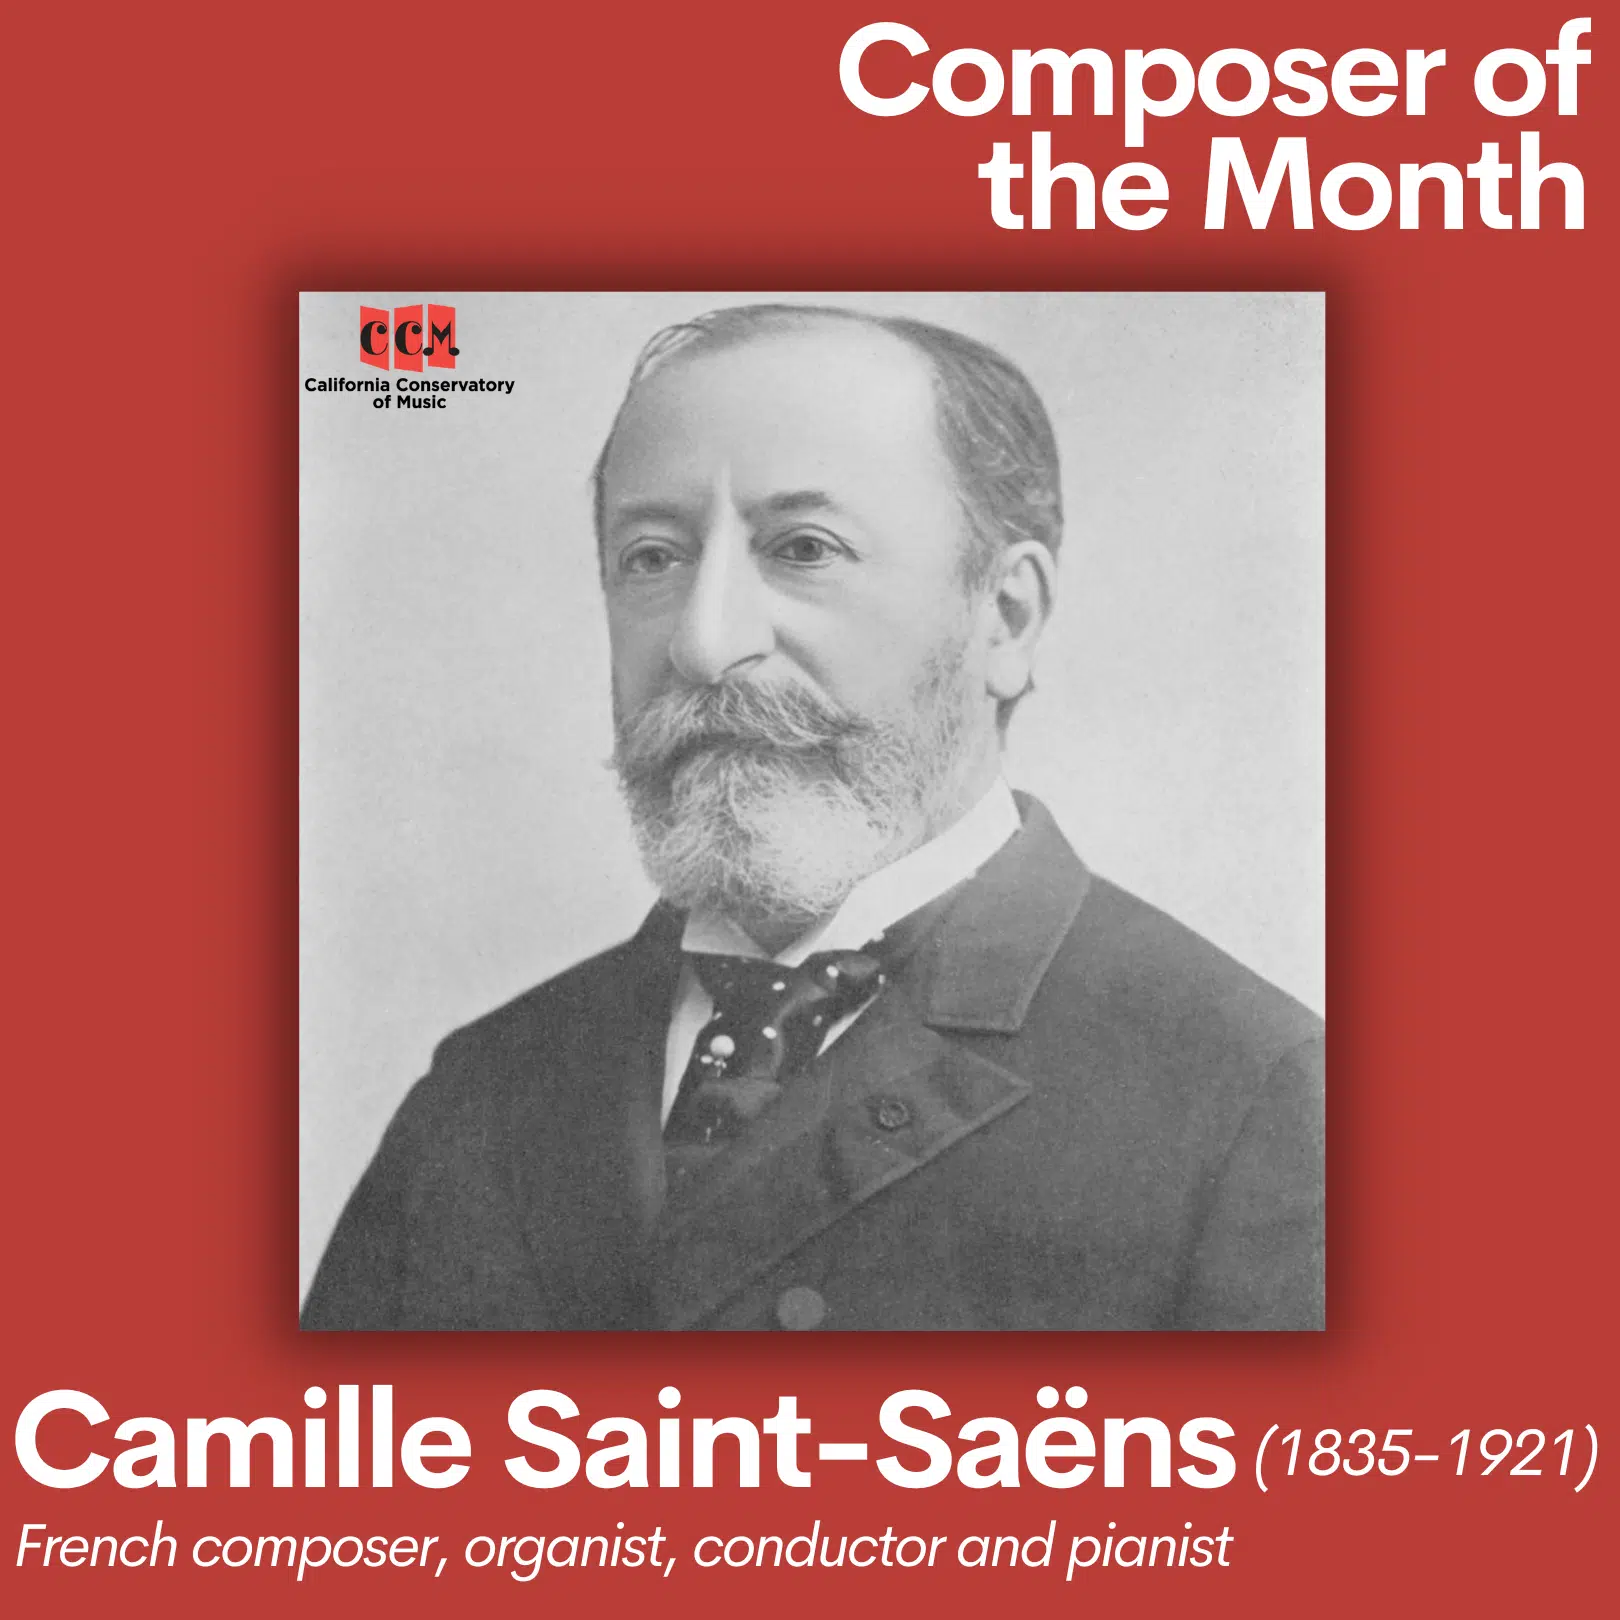 Camille Saint-Saëns, the October Composer of the Month